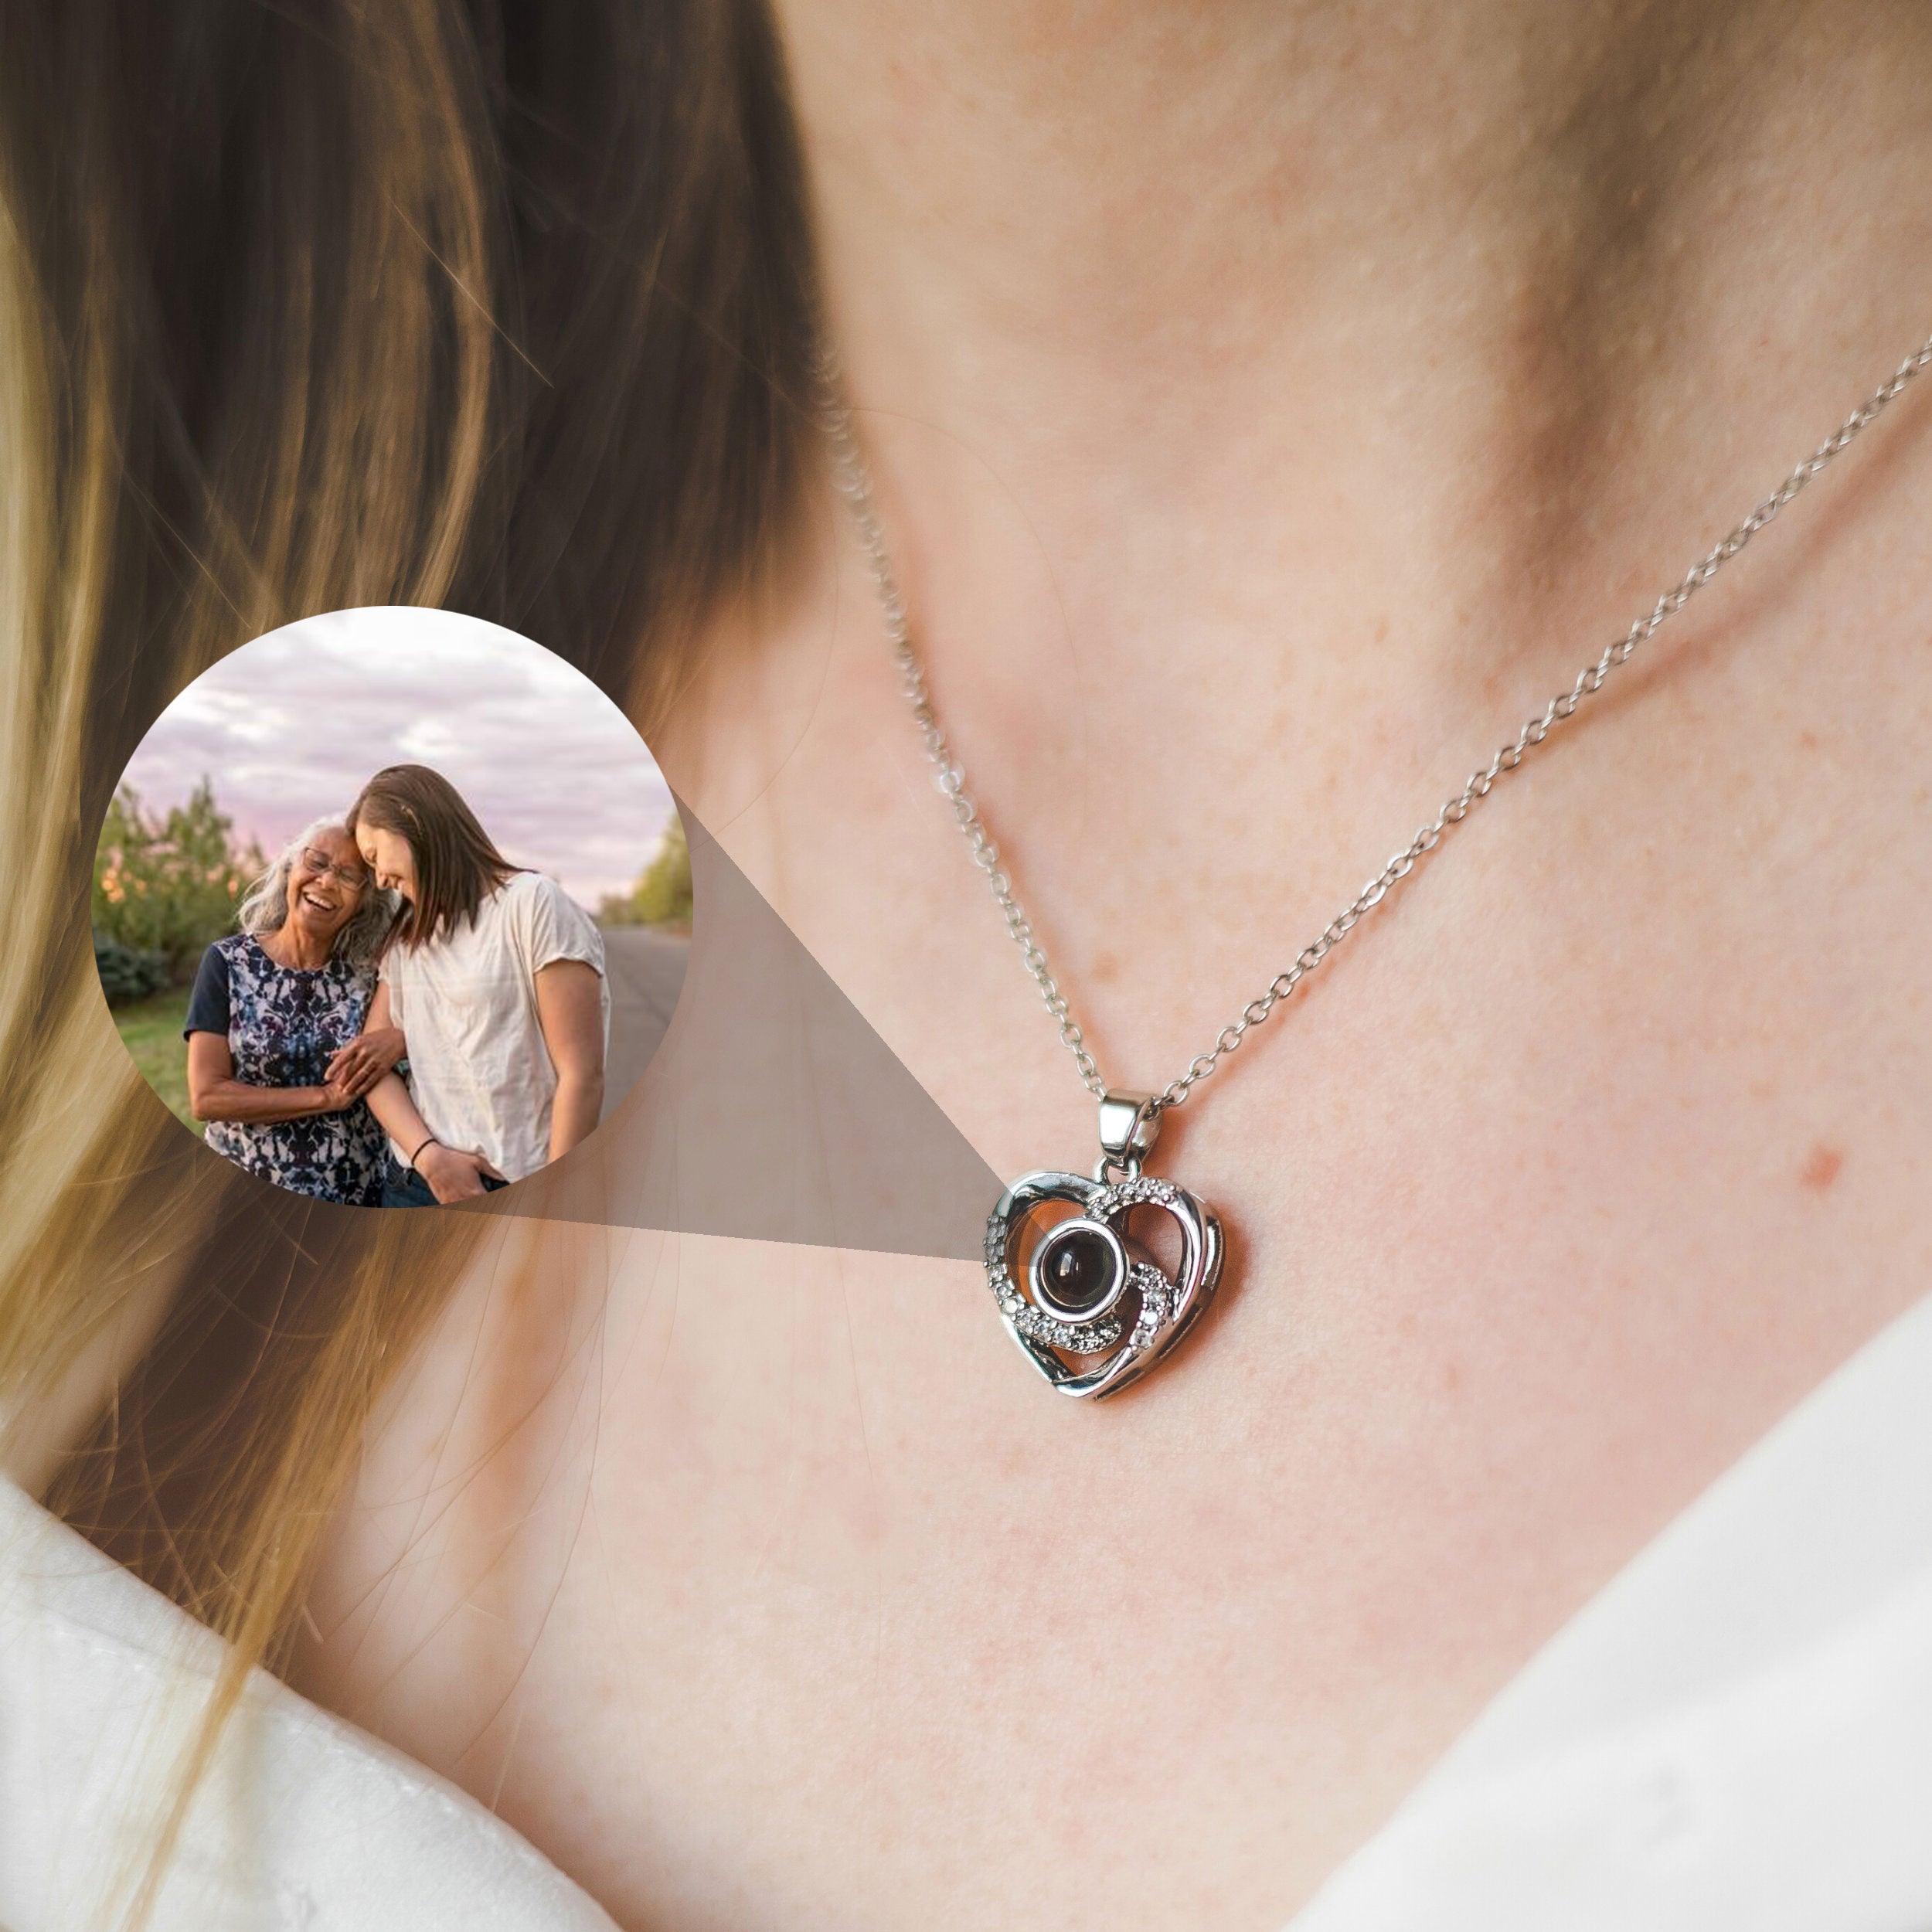 Love Heart Locket Necklace Charm | Love Is Project - Personalized Picture